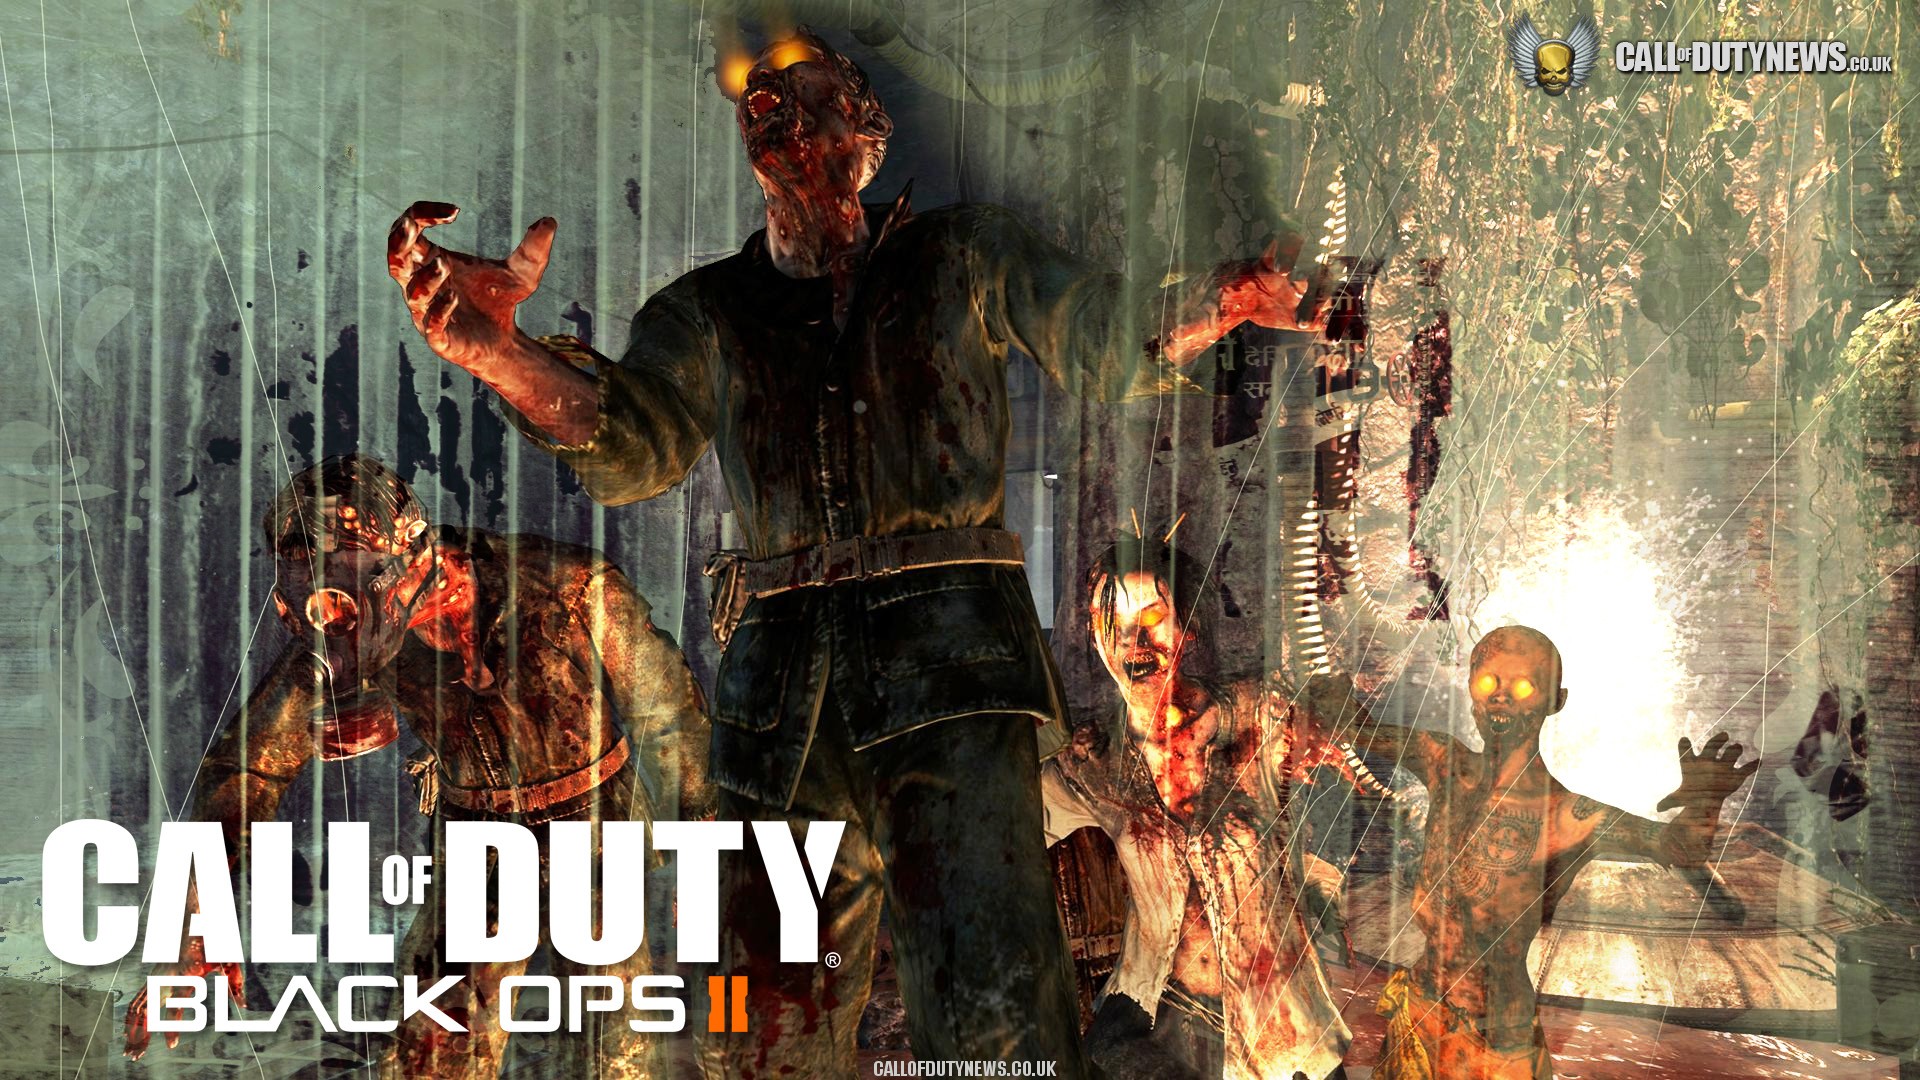 duty black ops 2 zombies wallpaper hdCall Of Duty Black Ops 2 Zombies